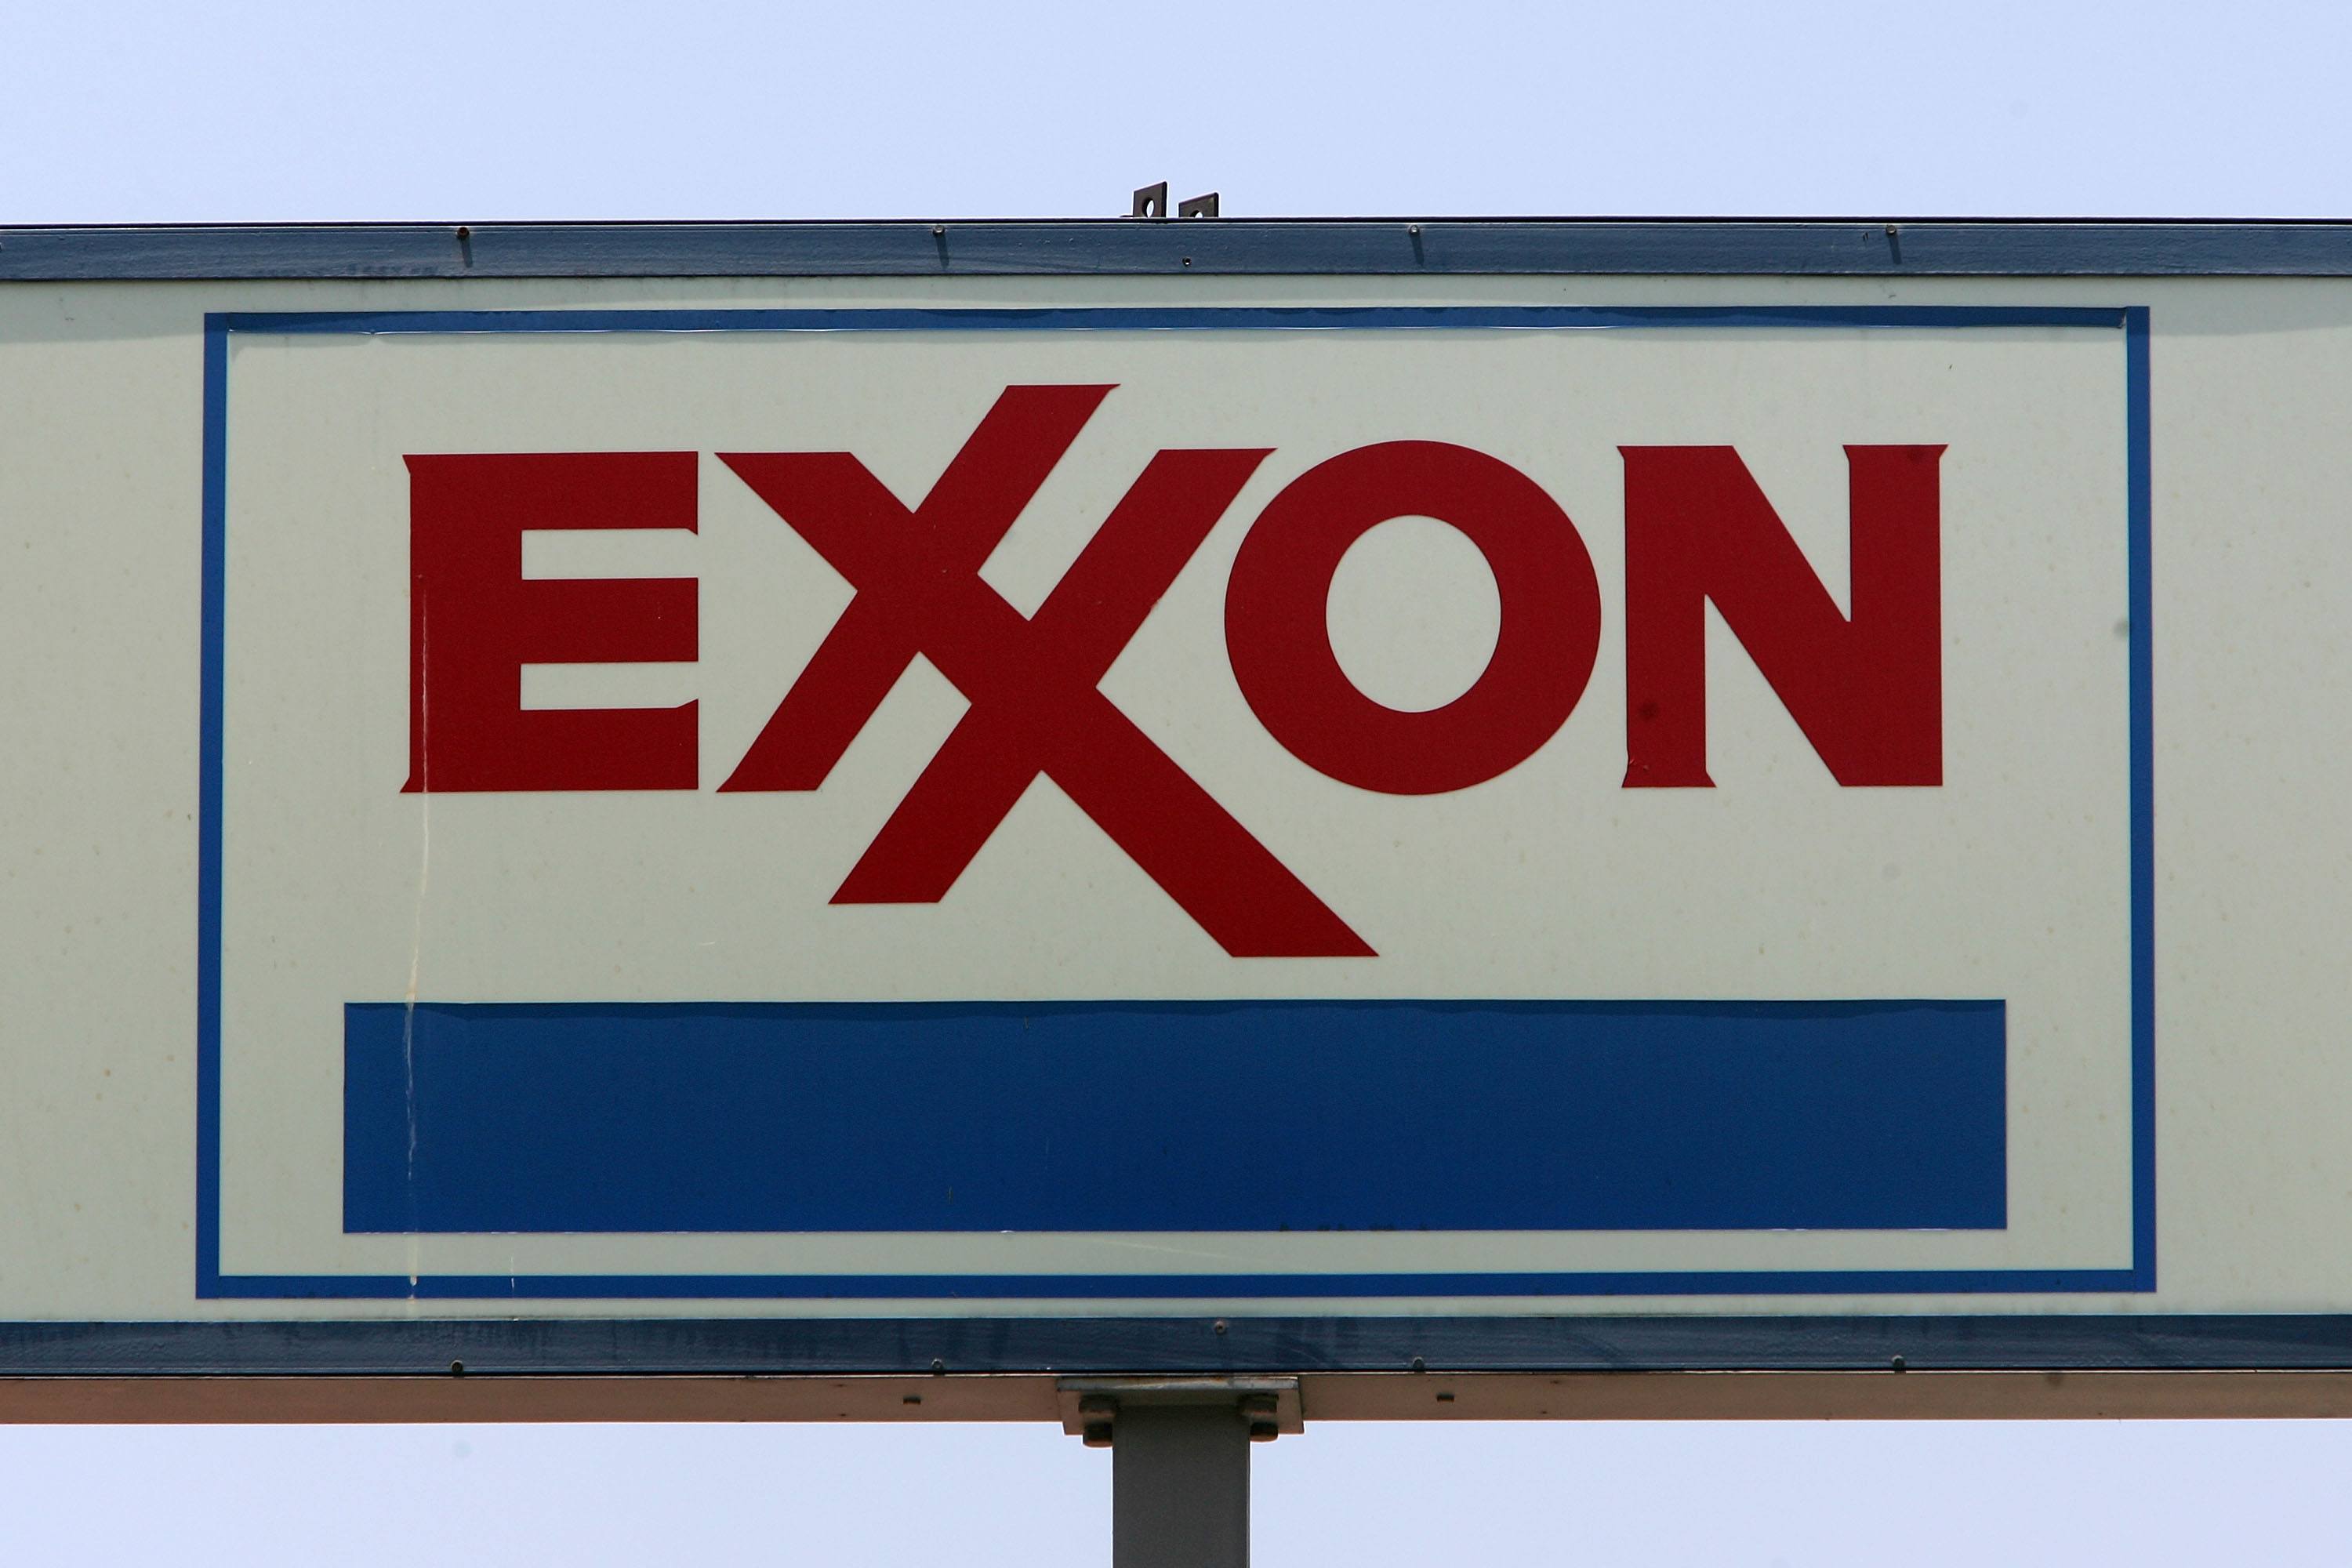 A sign advertises an Exxon gas station